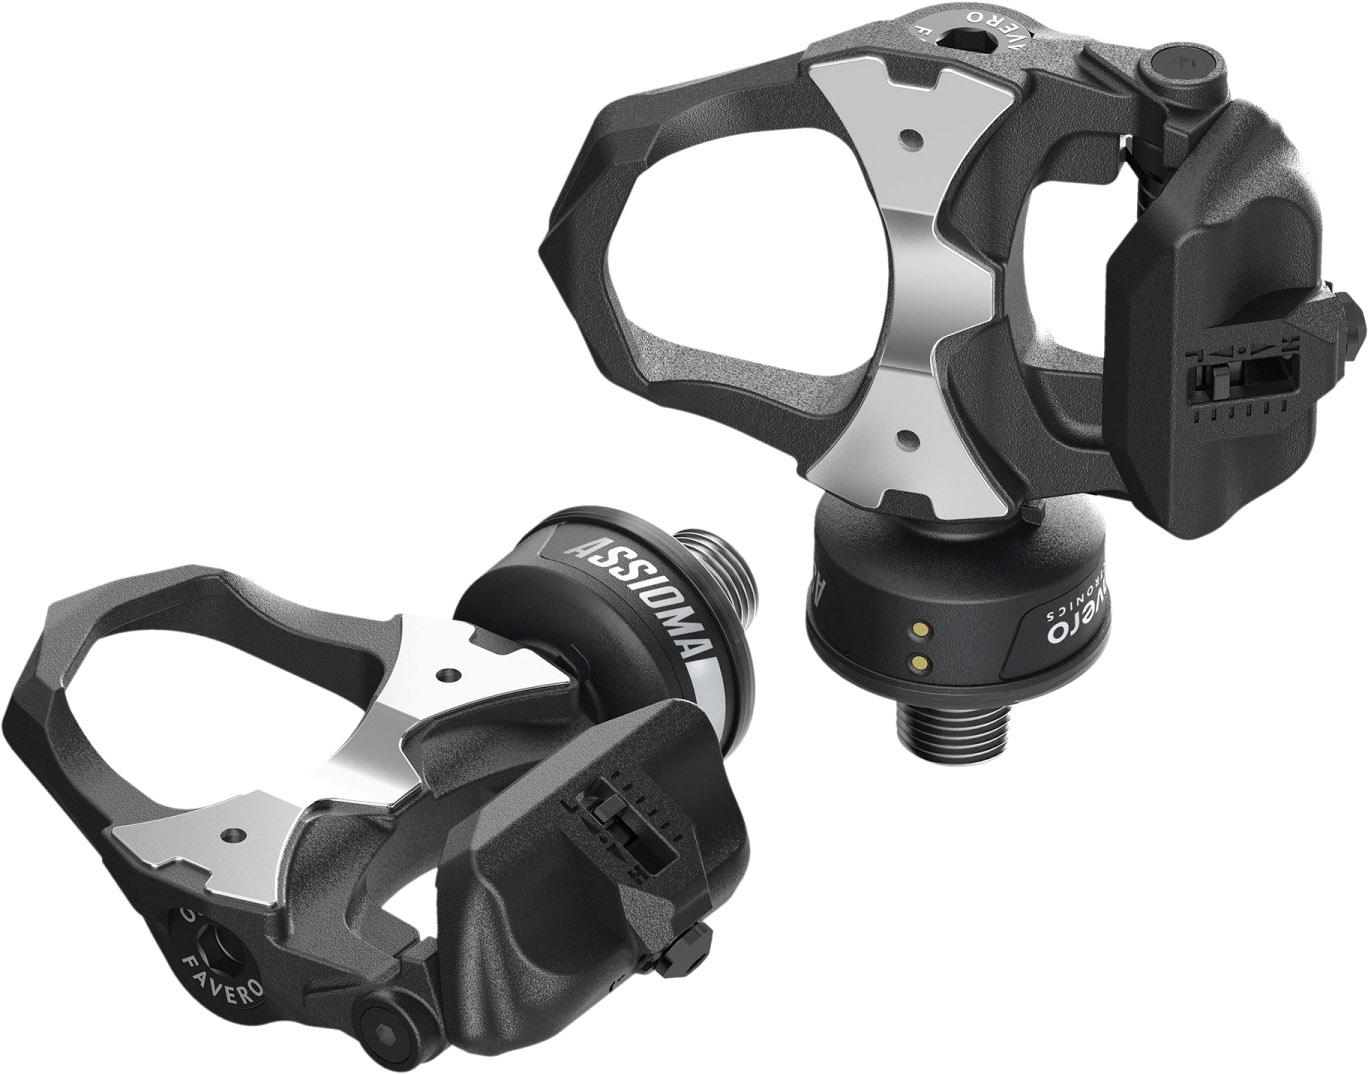 Favero Assioma Duo Power Meter Pedals  Black/grey